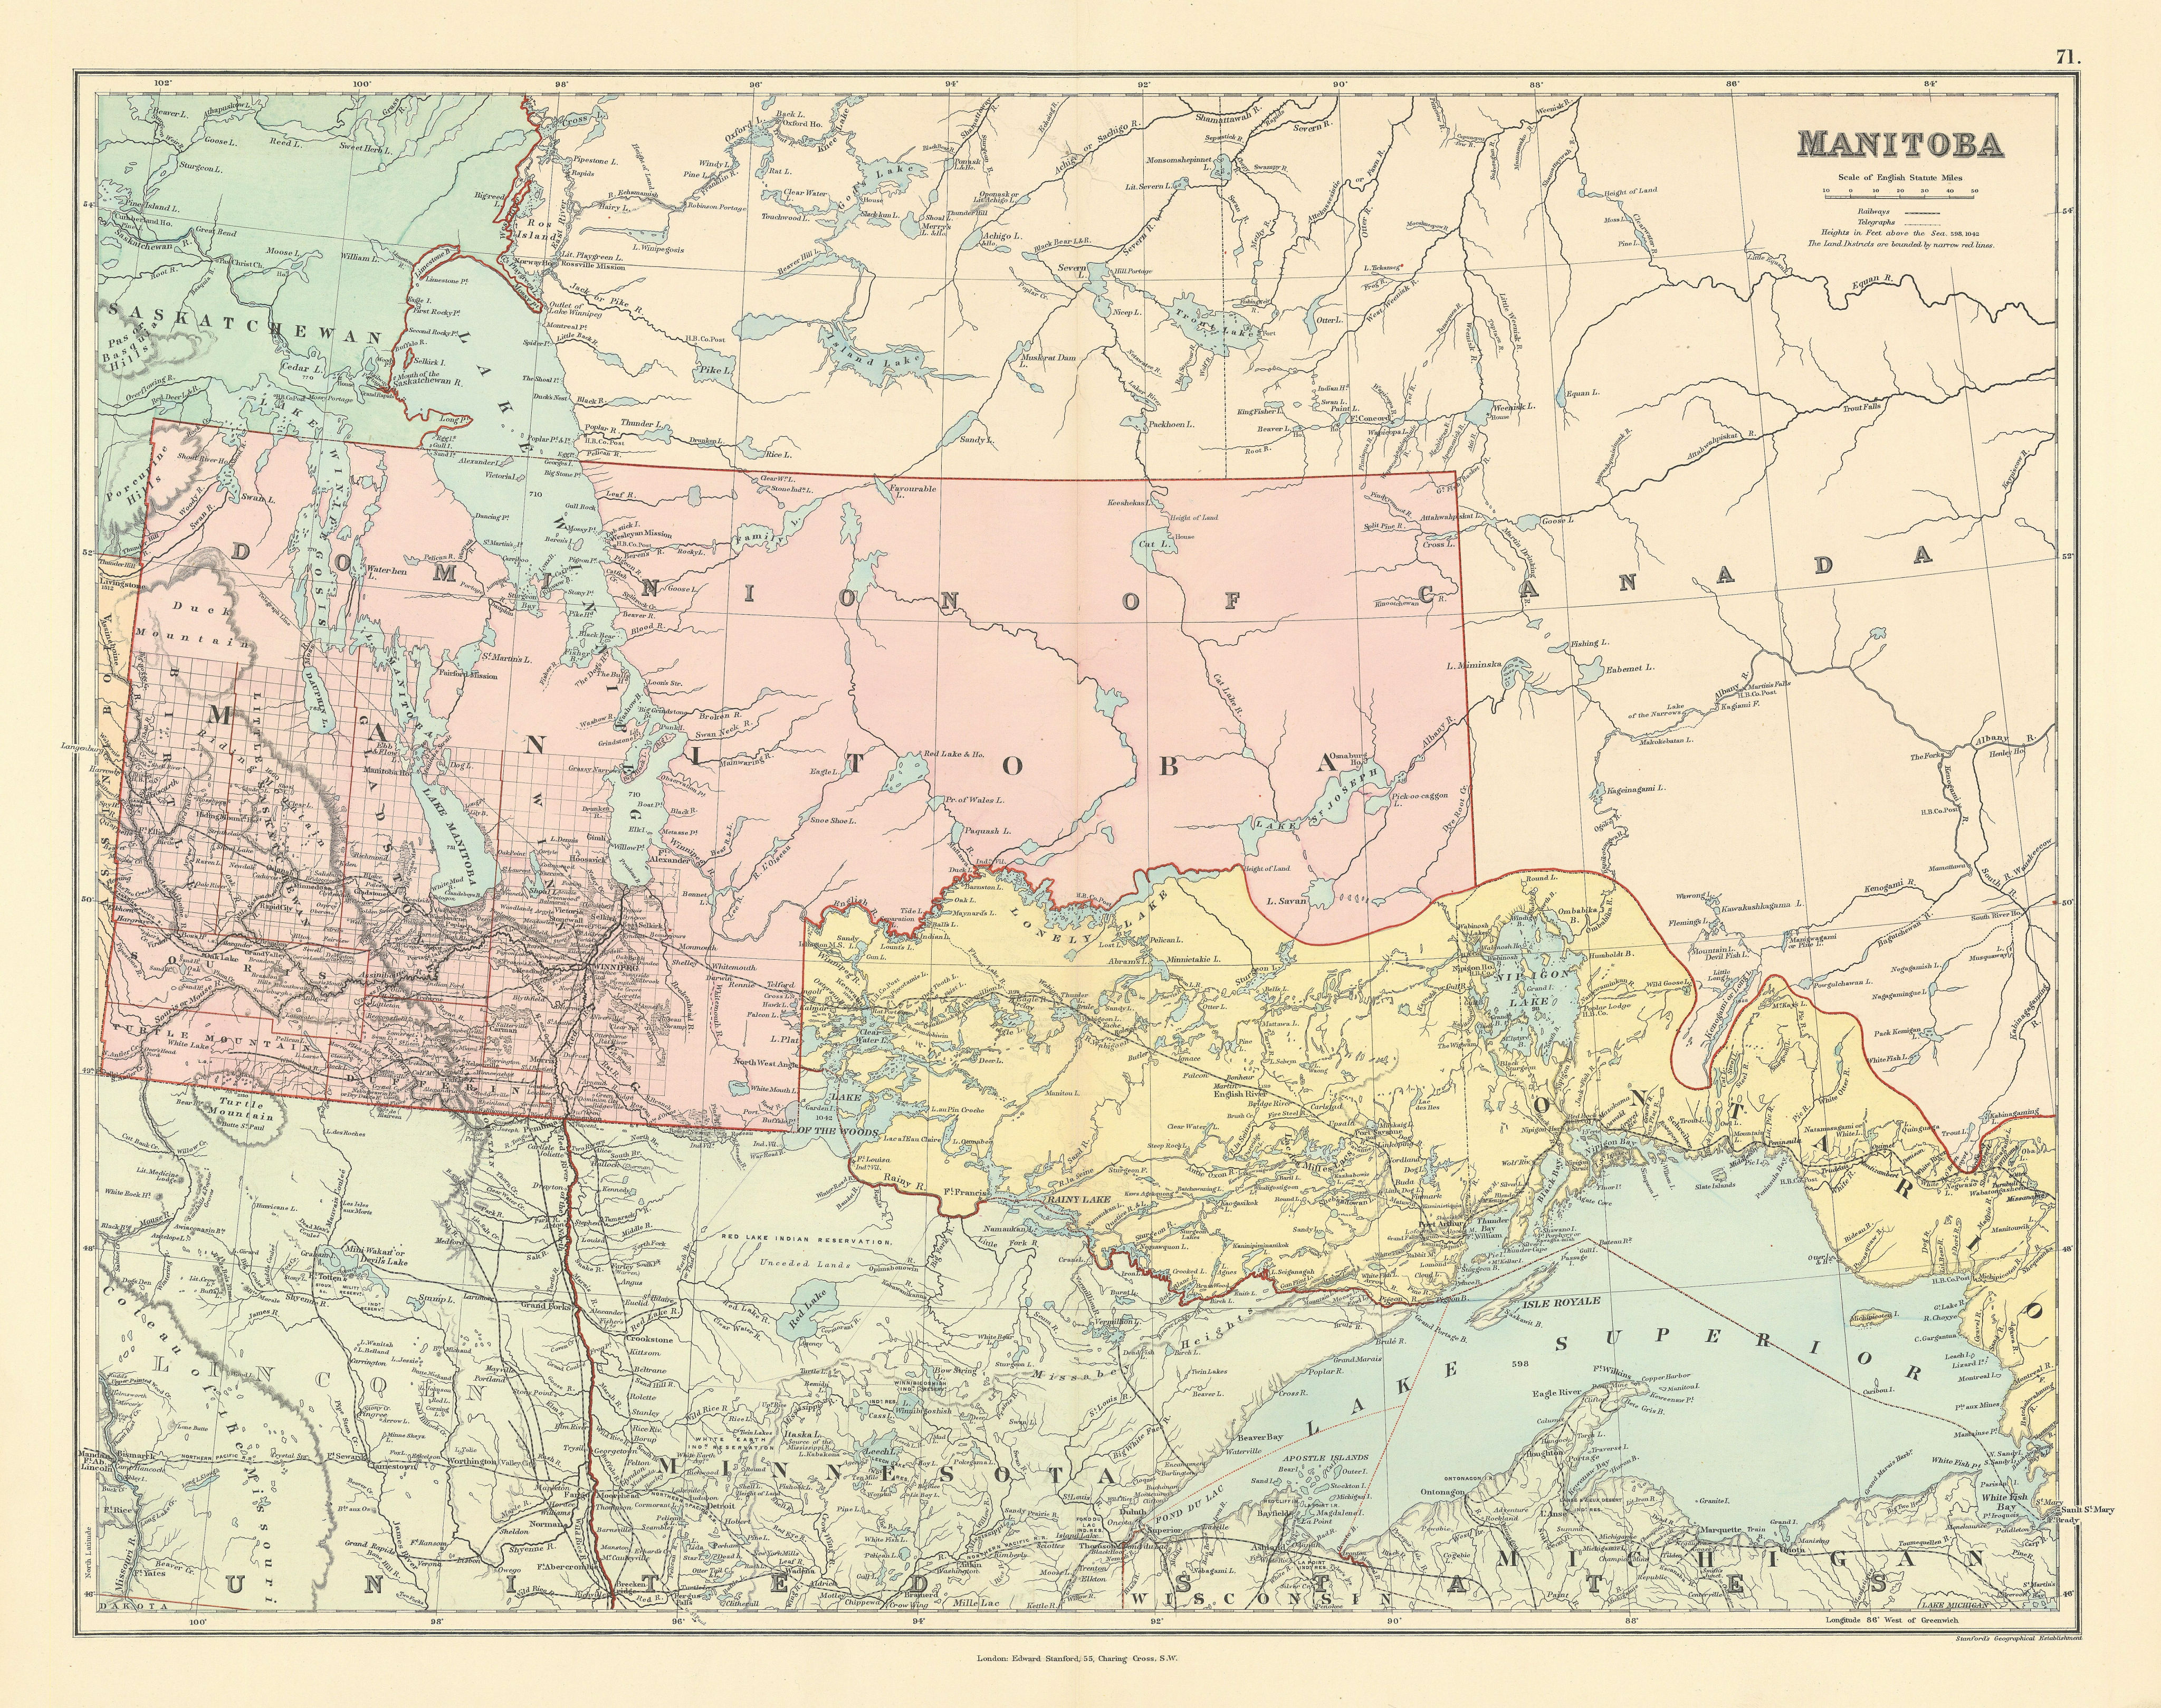 Associate Product Manitoba showing unrecognised borders. 51x65cm. Canada. STANFORD 1887 old map